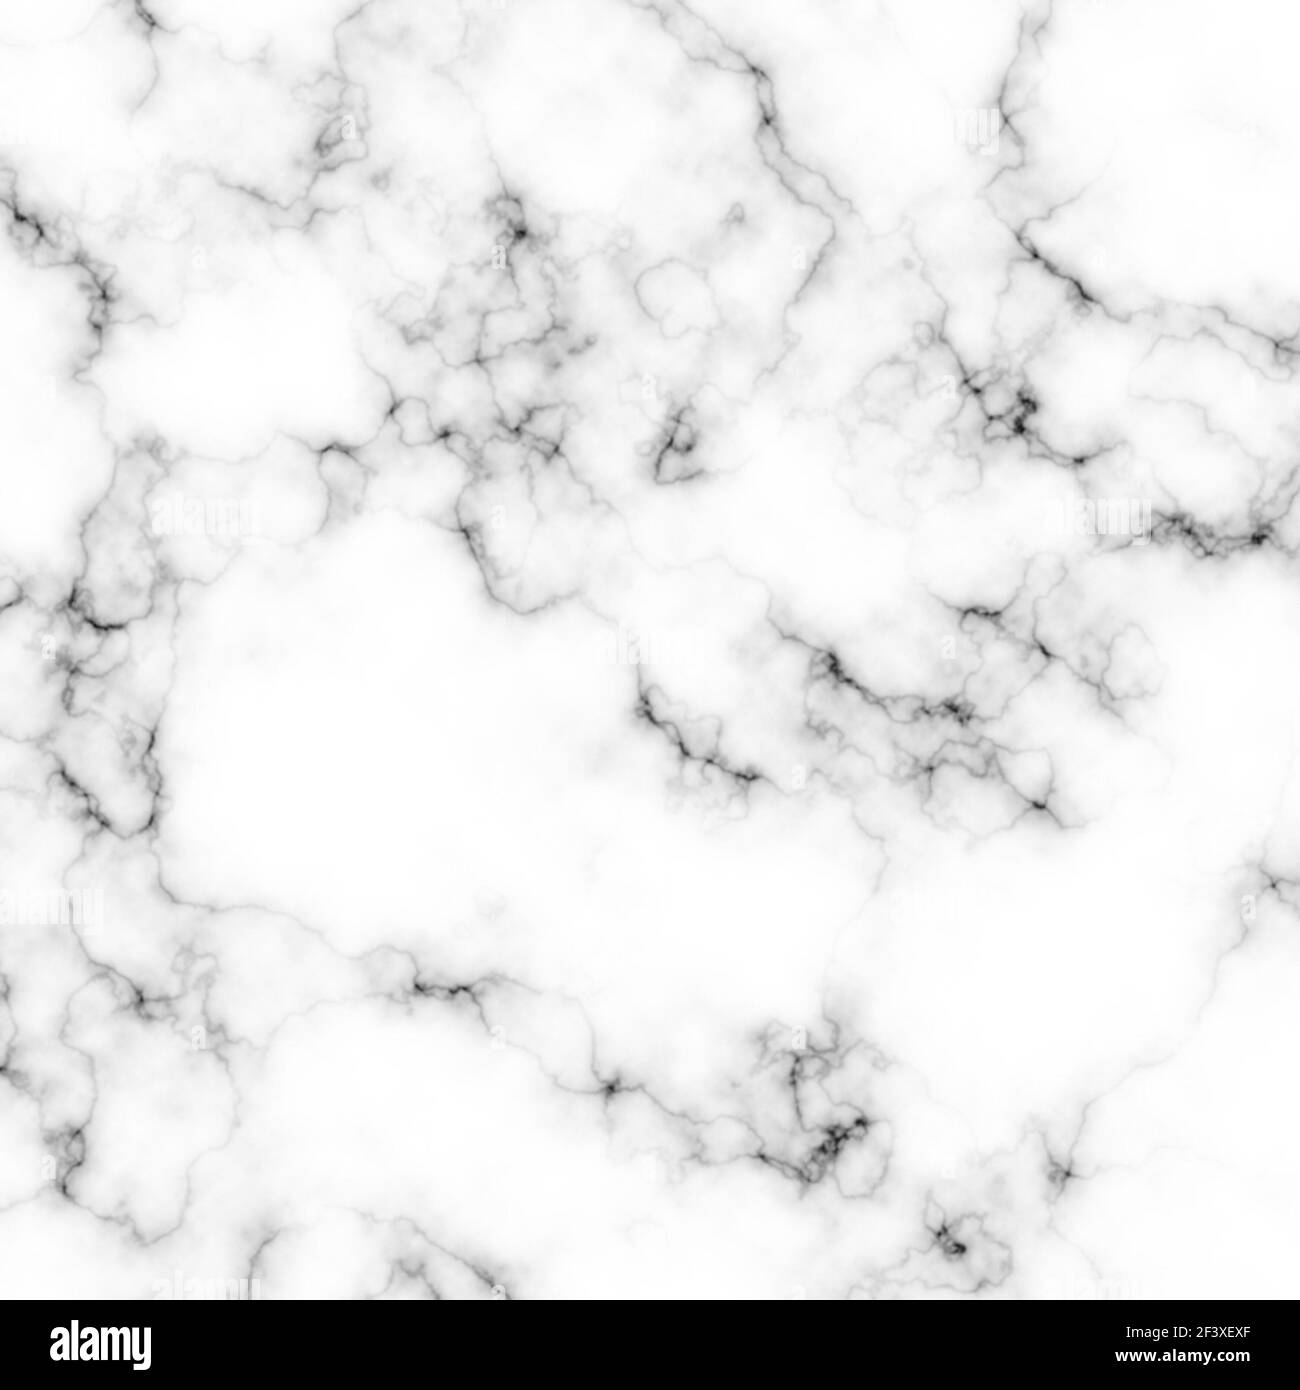 An illustration of a gray patterned elegant marble texture background Stock Photo